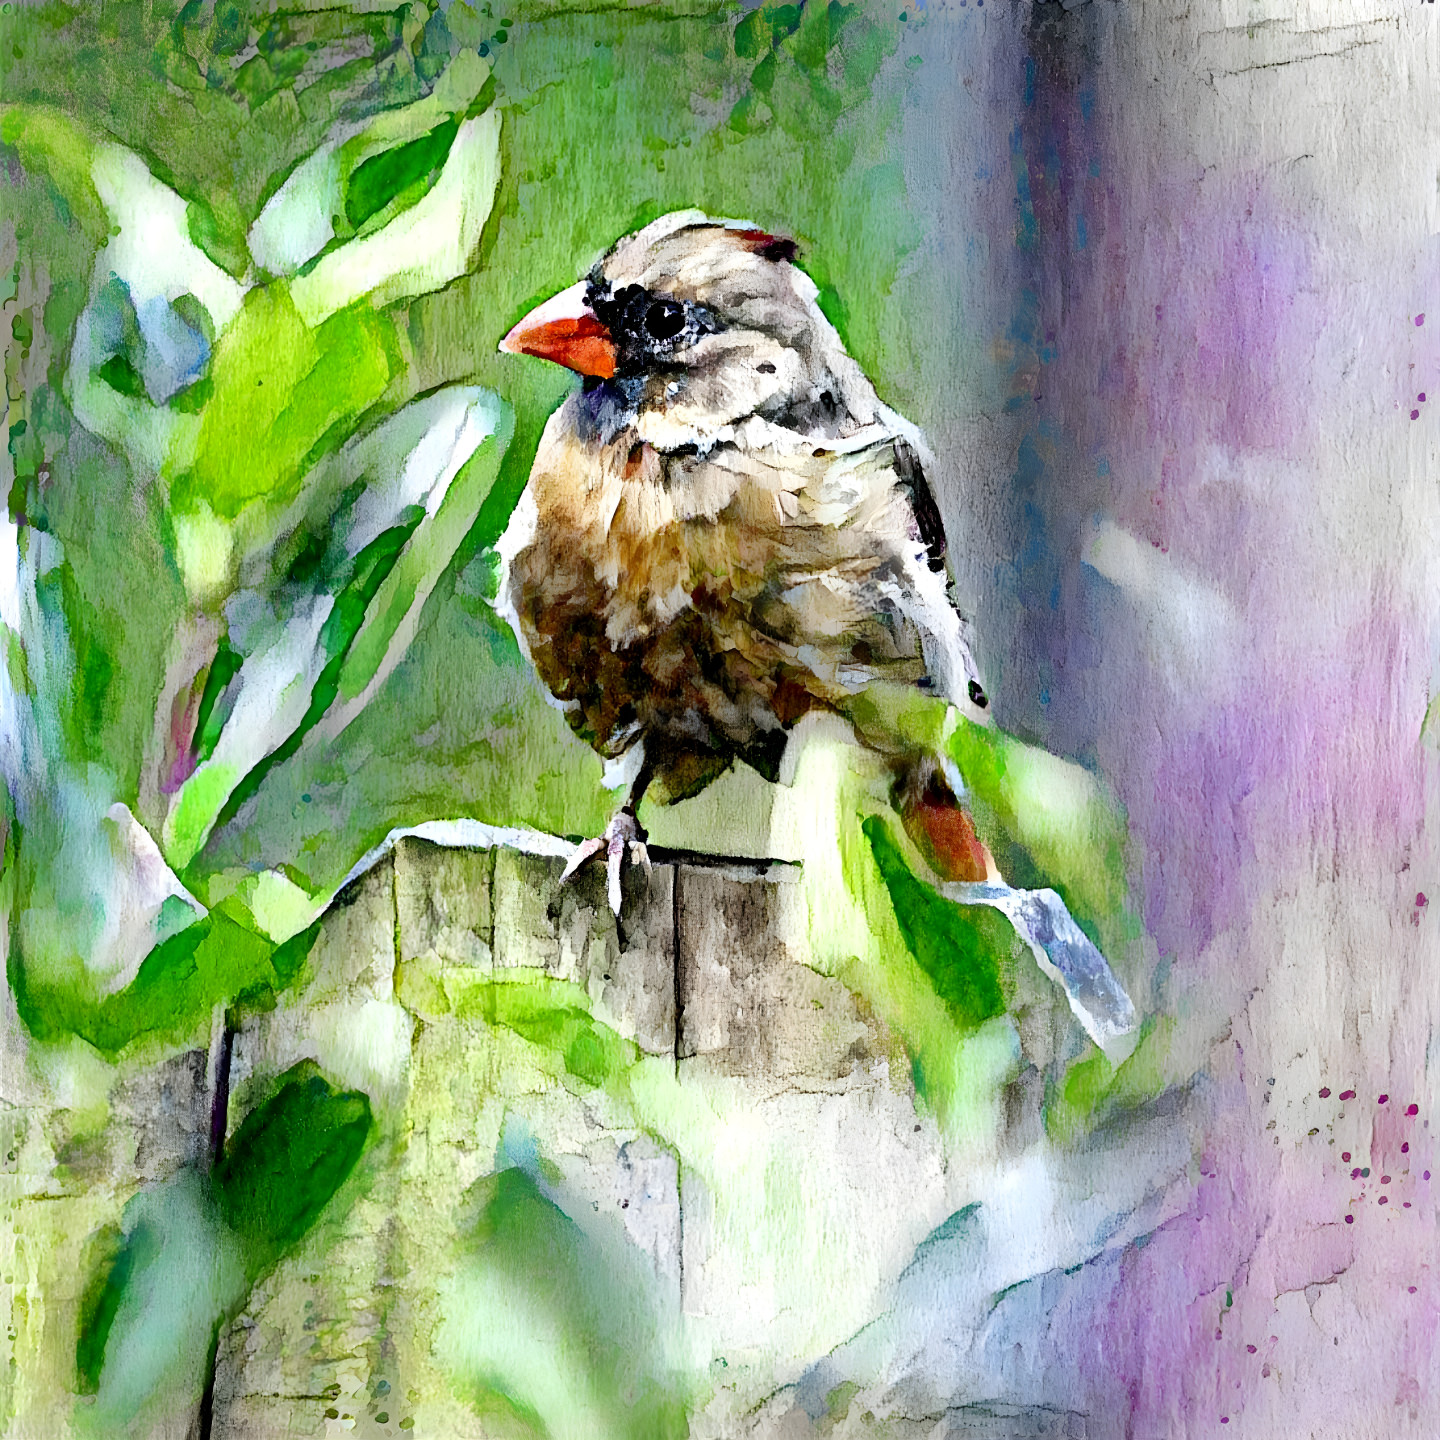 Cardinal fledgling on the fence